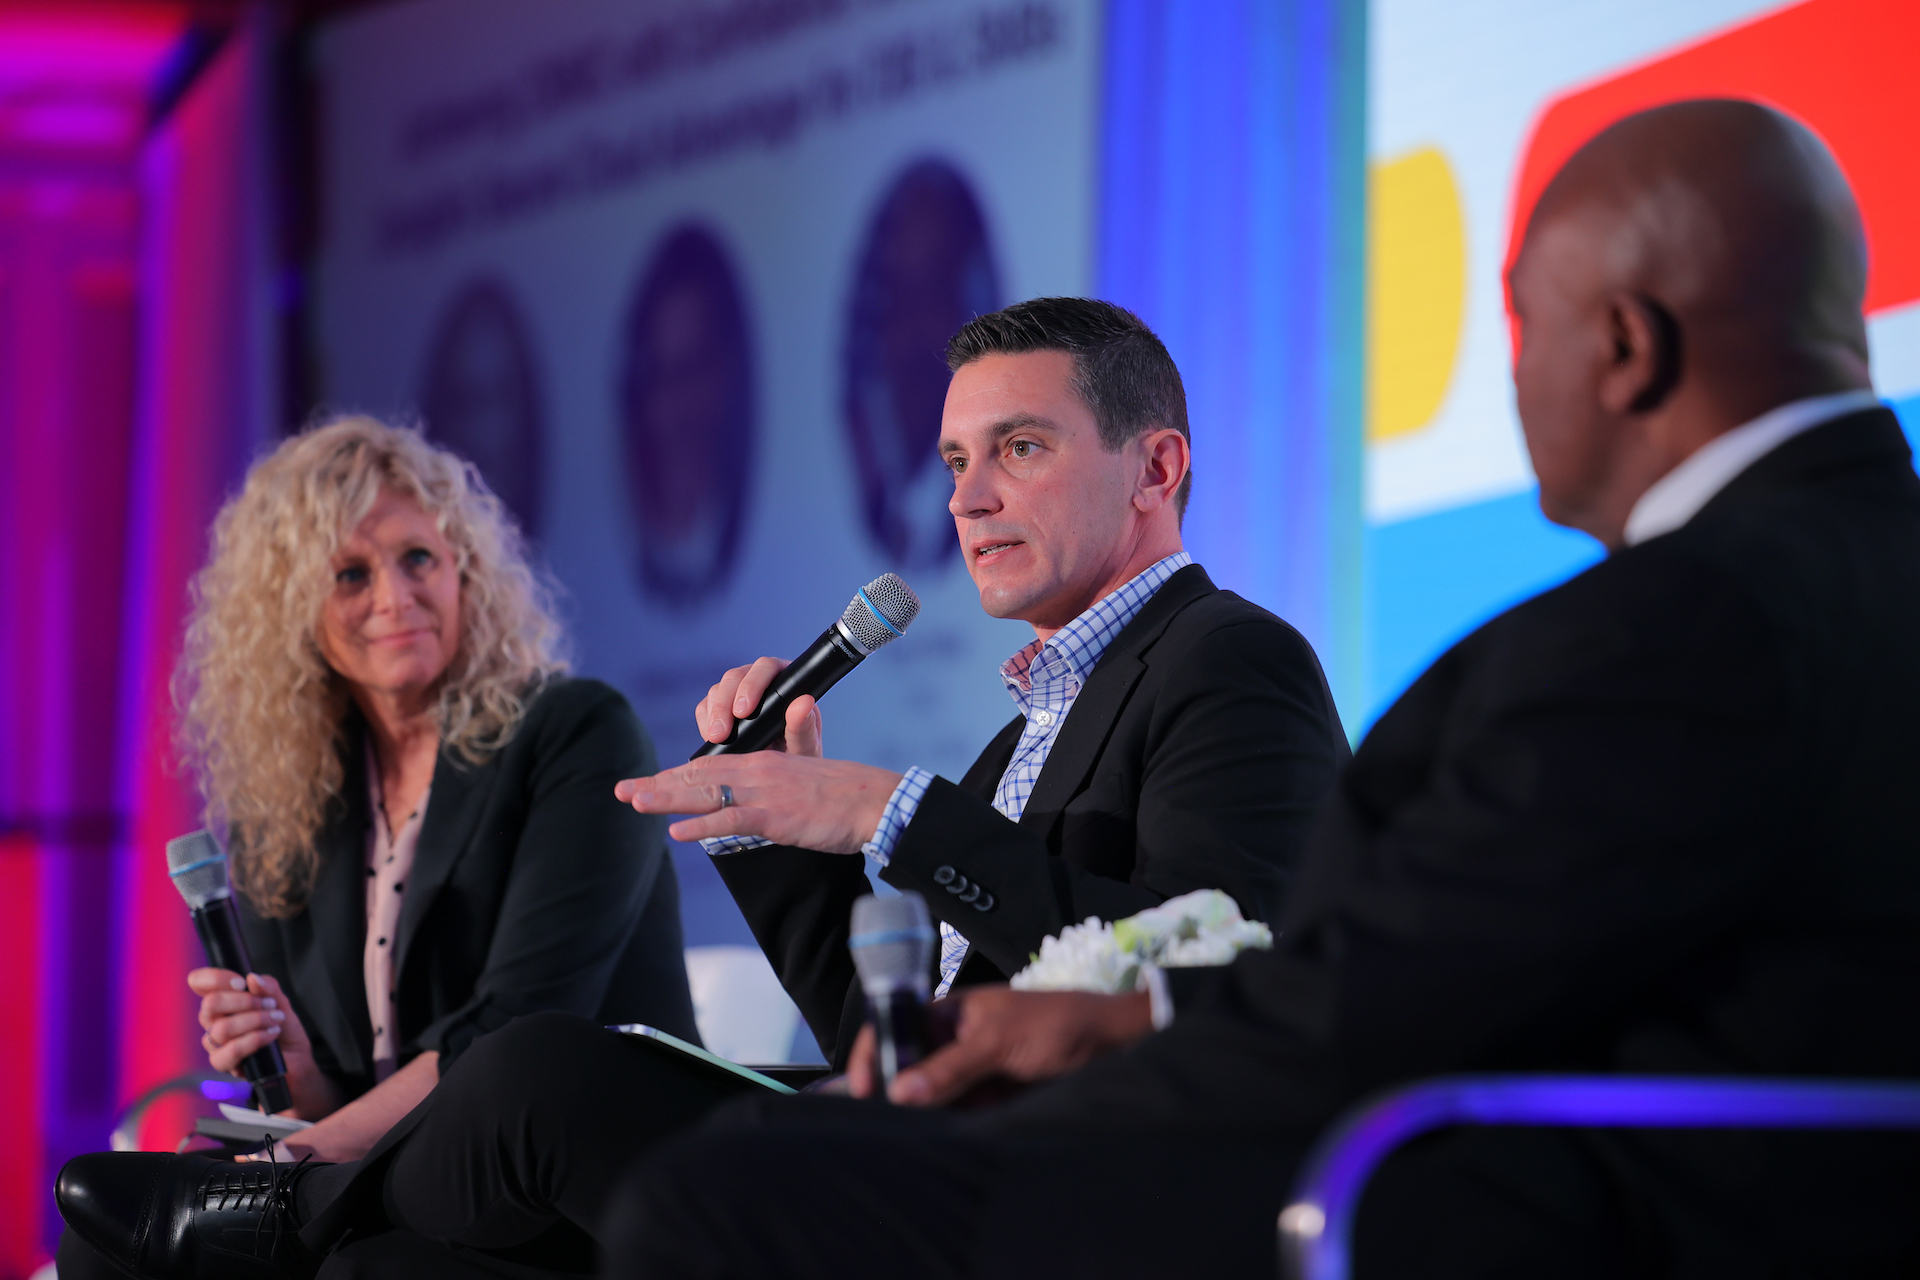 Matthew Picerno (center) and Tony Plater (right) speak on a panel at the Google Defense Forum, moderated by Google's Elizabeth Moon. (DefenseScoop)